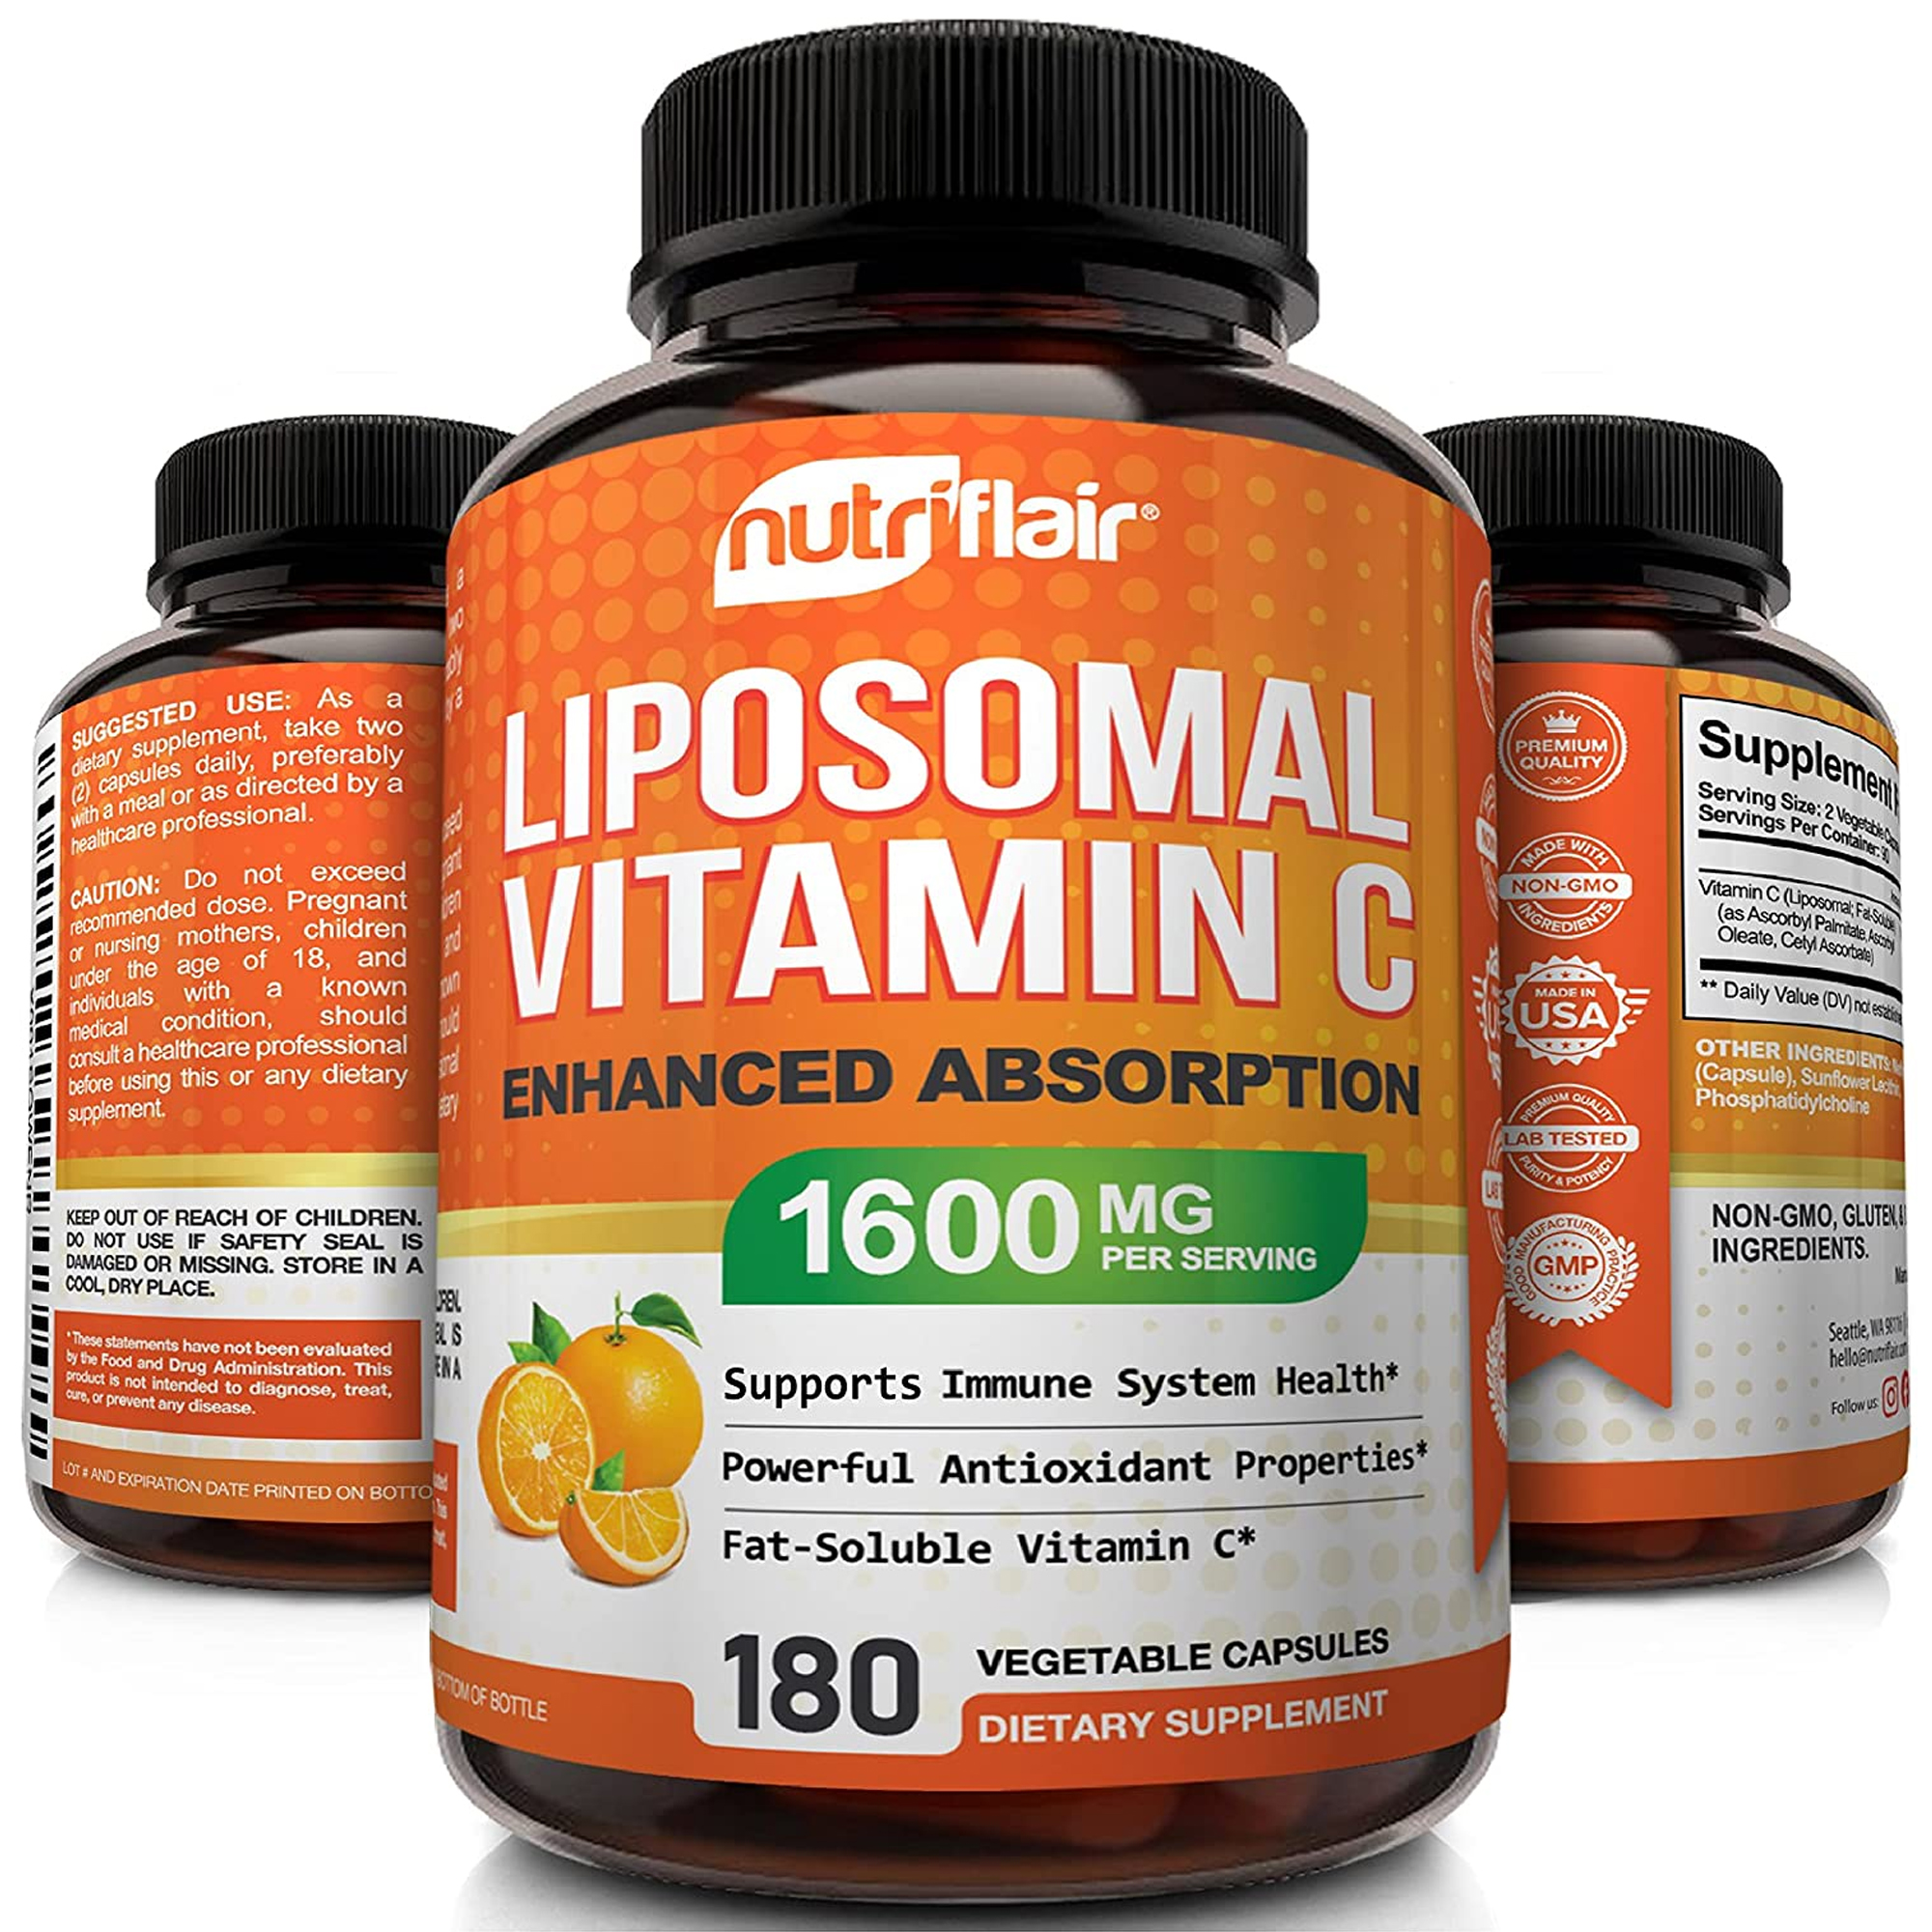 NutriFlair Liposomal Vitamin C 1600mg, 180 Capsules - High Absorption, Fat Soluble VIT C, Antioxidant Supplement, Higher Bioavailability Immune System Support & Collagen Booster, Non-GMO, Vegan Pills - image 1 of 7